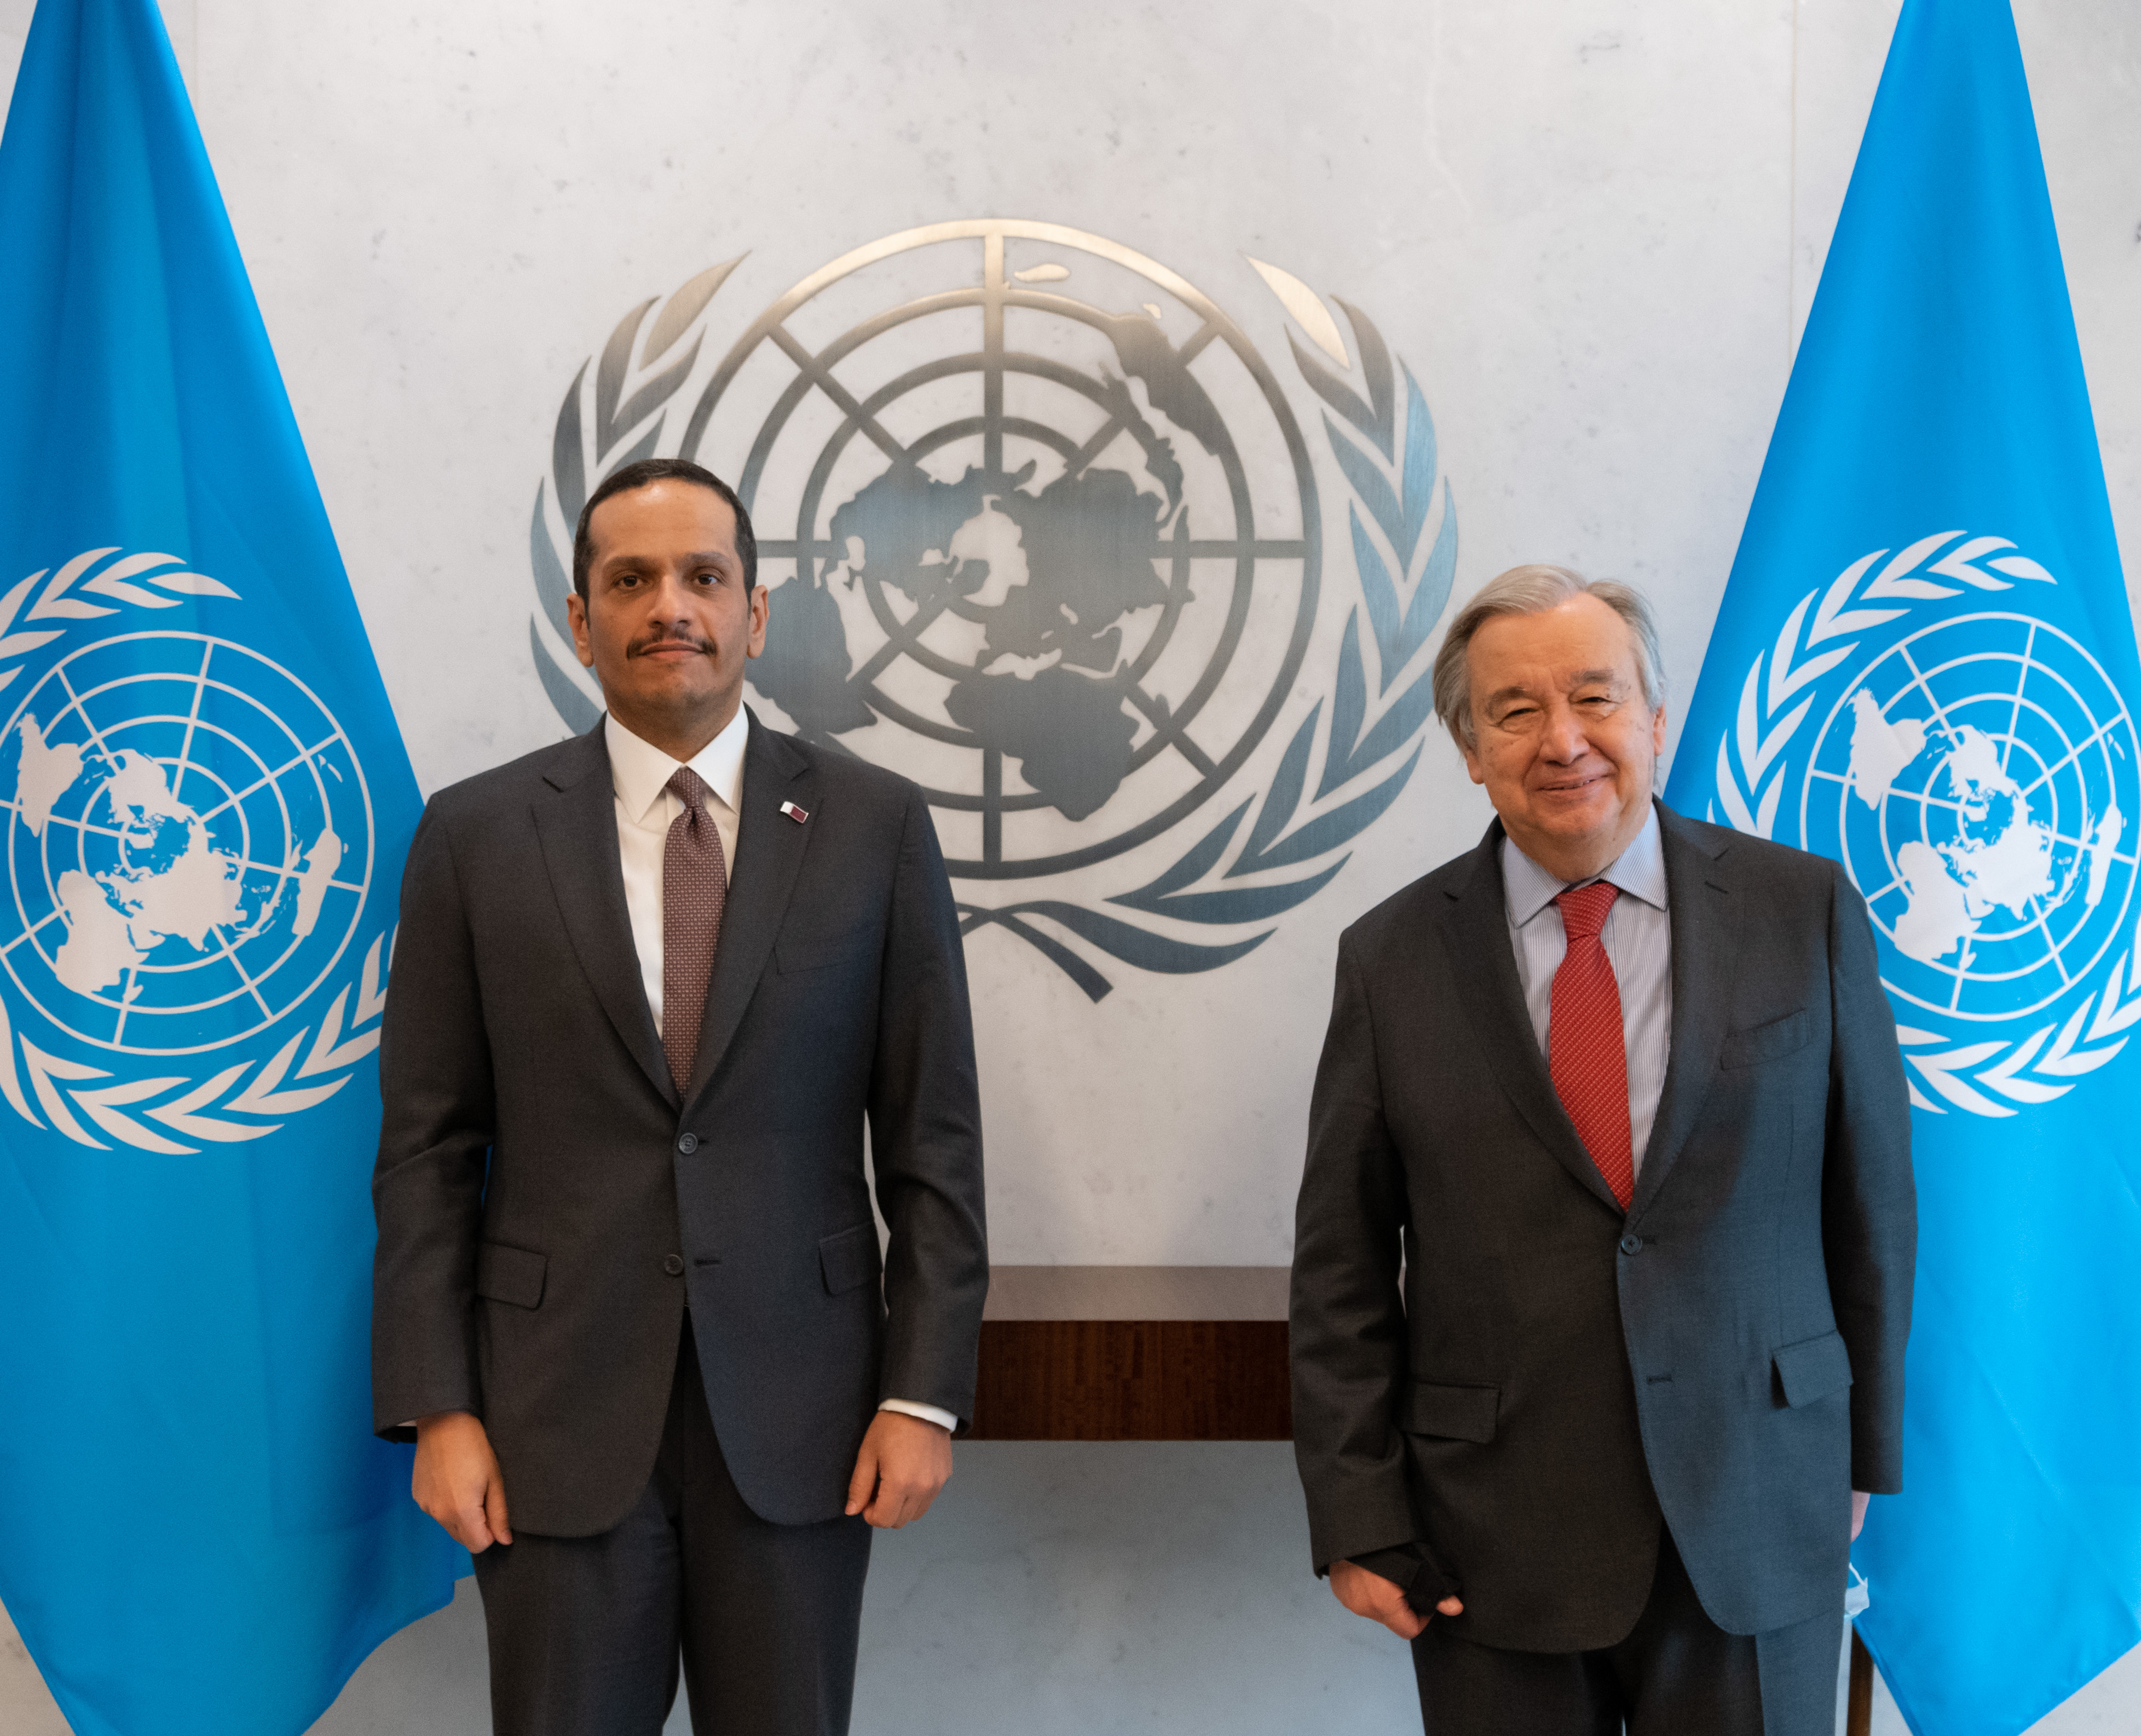 Deputy Prime Minister and Minister of Foreign Affairs Meets UN Secretary-General